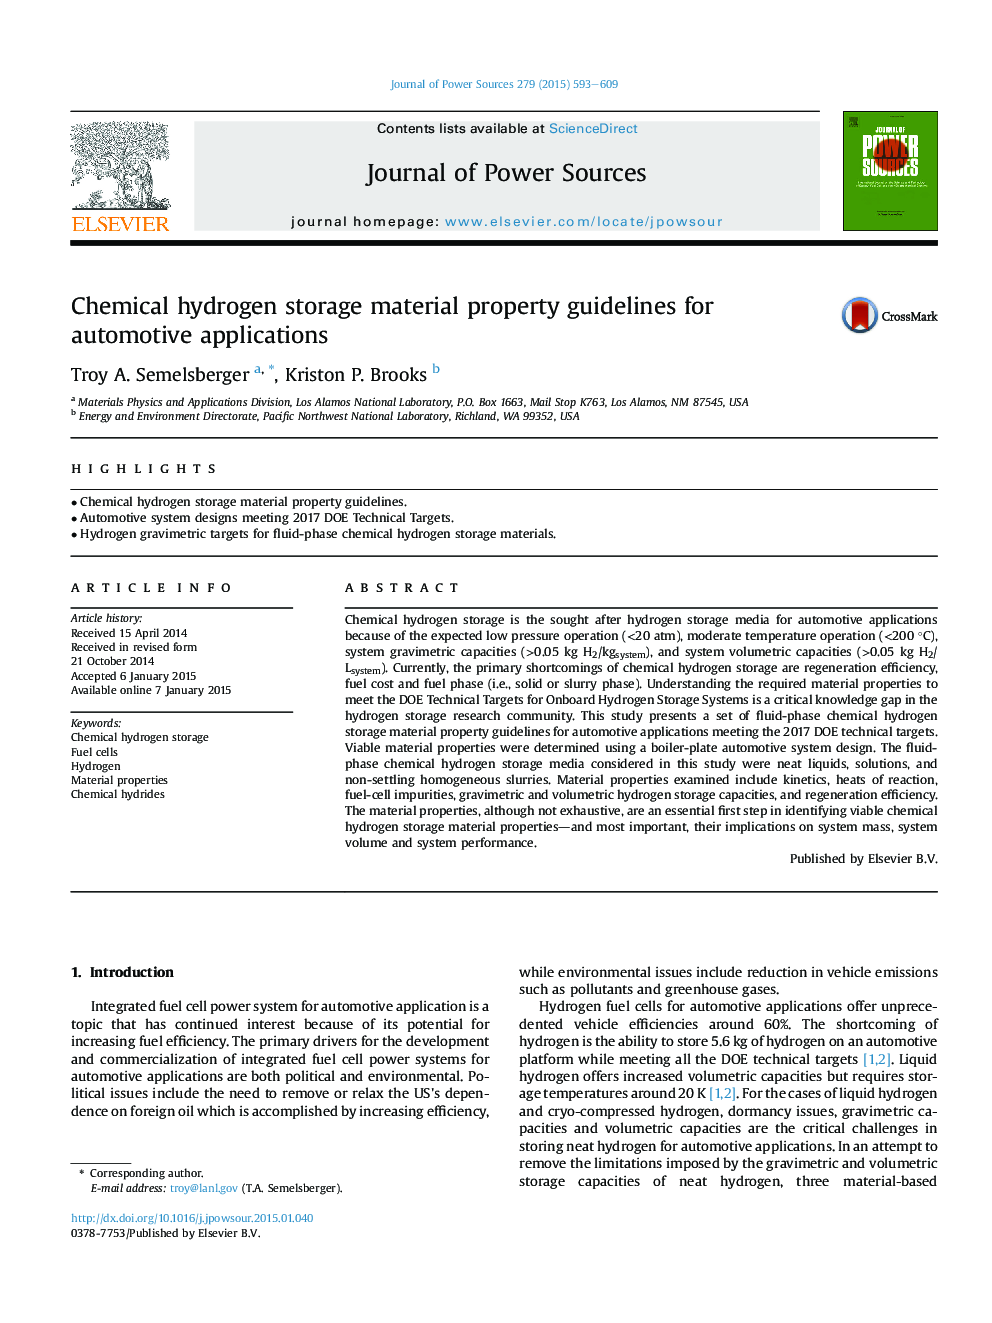 Chemical hydrogen storage material property guidelines for automotive applications